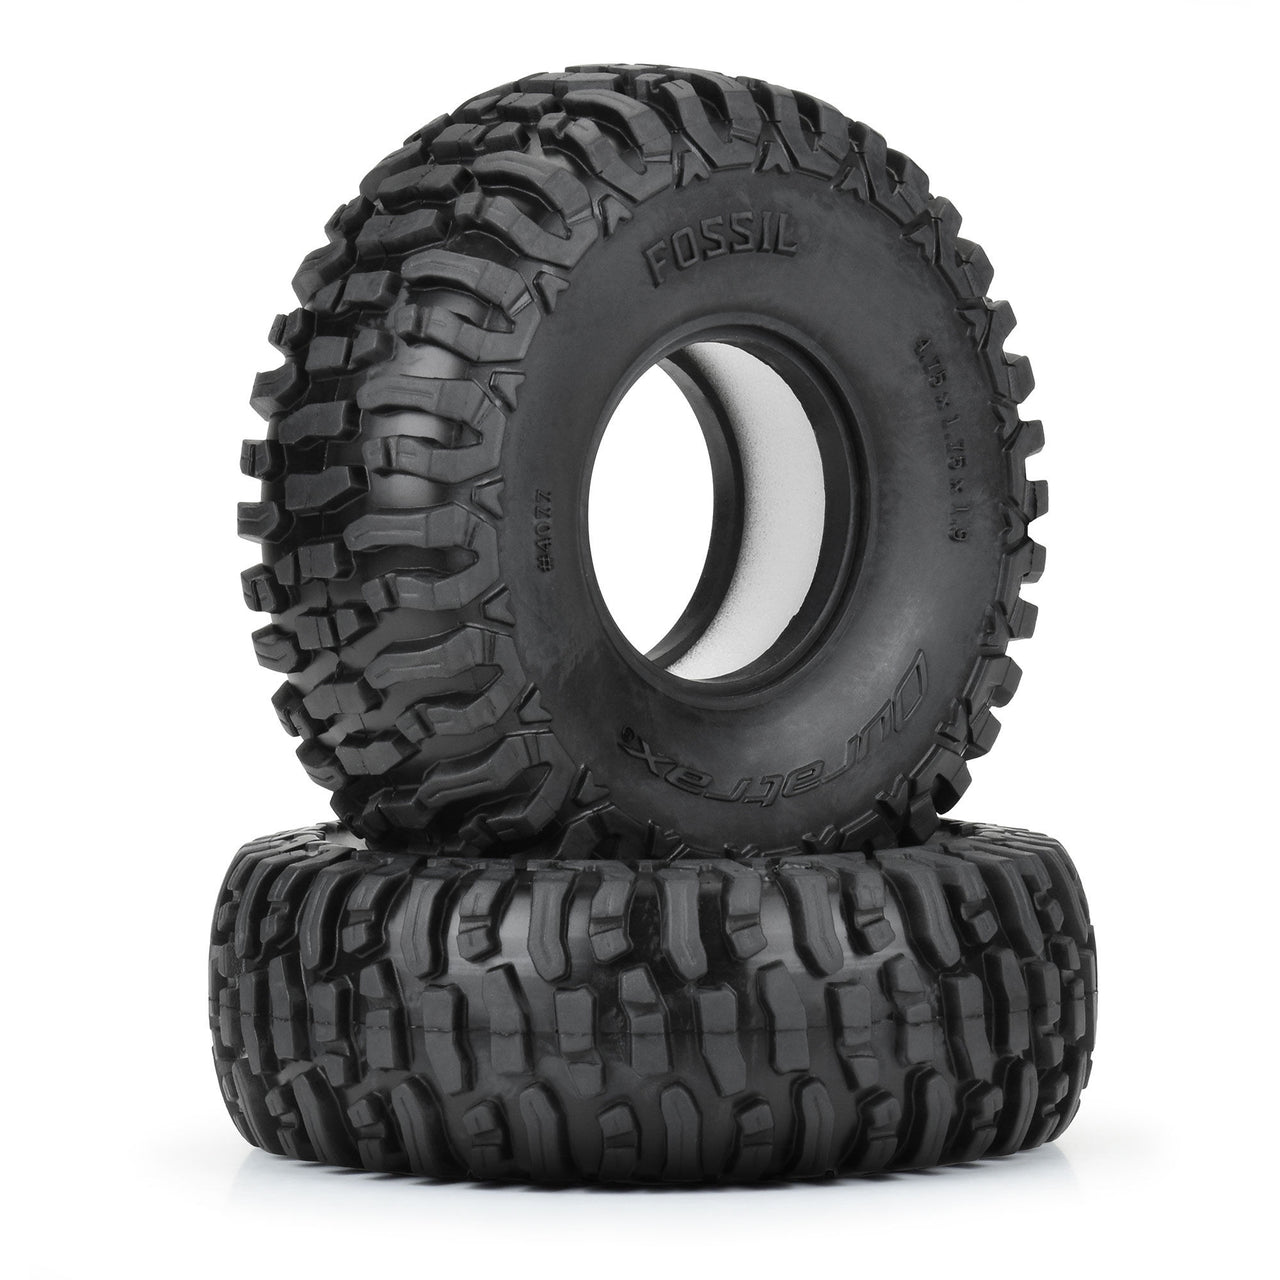 DTX4077 1/10 Fossil Front/Rear 1.9" Crawler Tires (2)